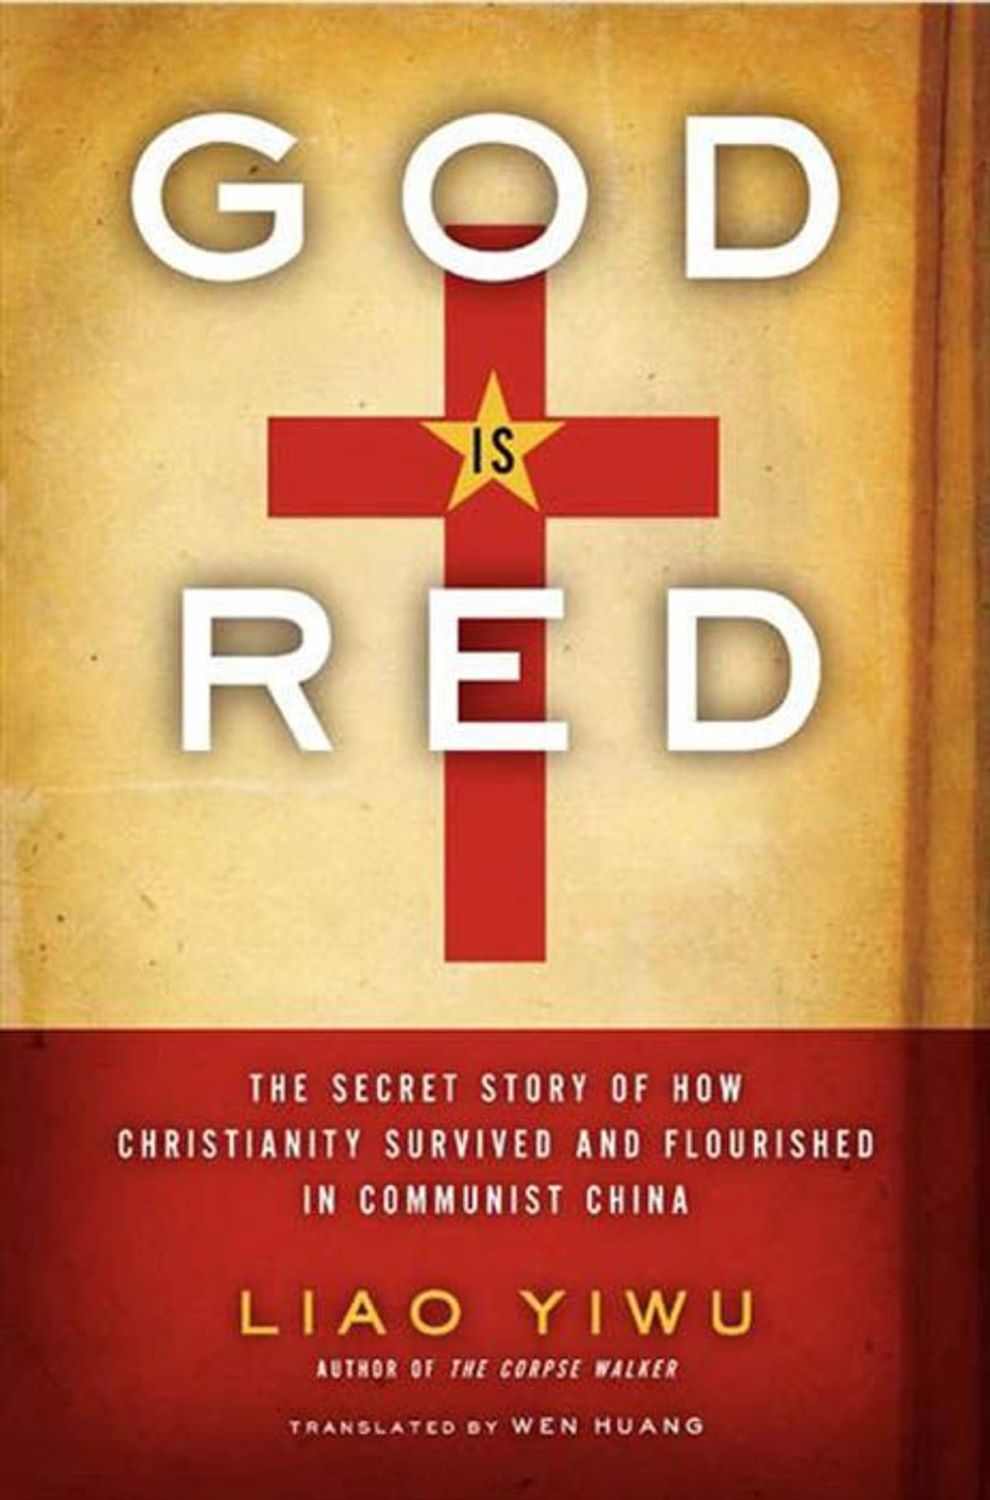 God Is Red by Liao Yiwu